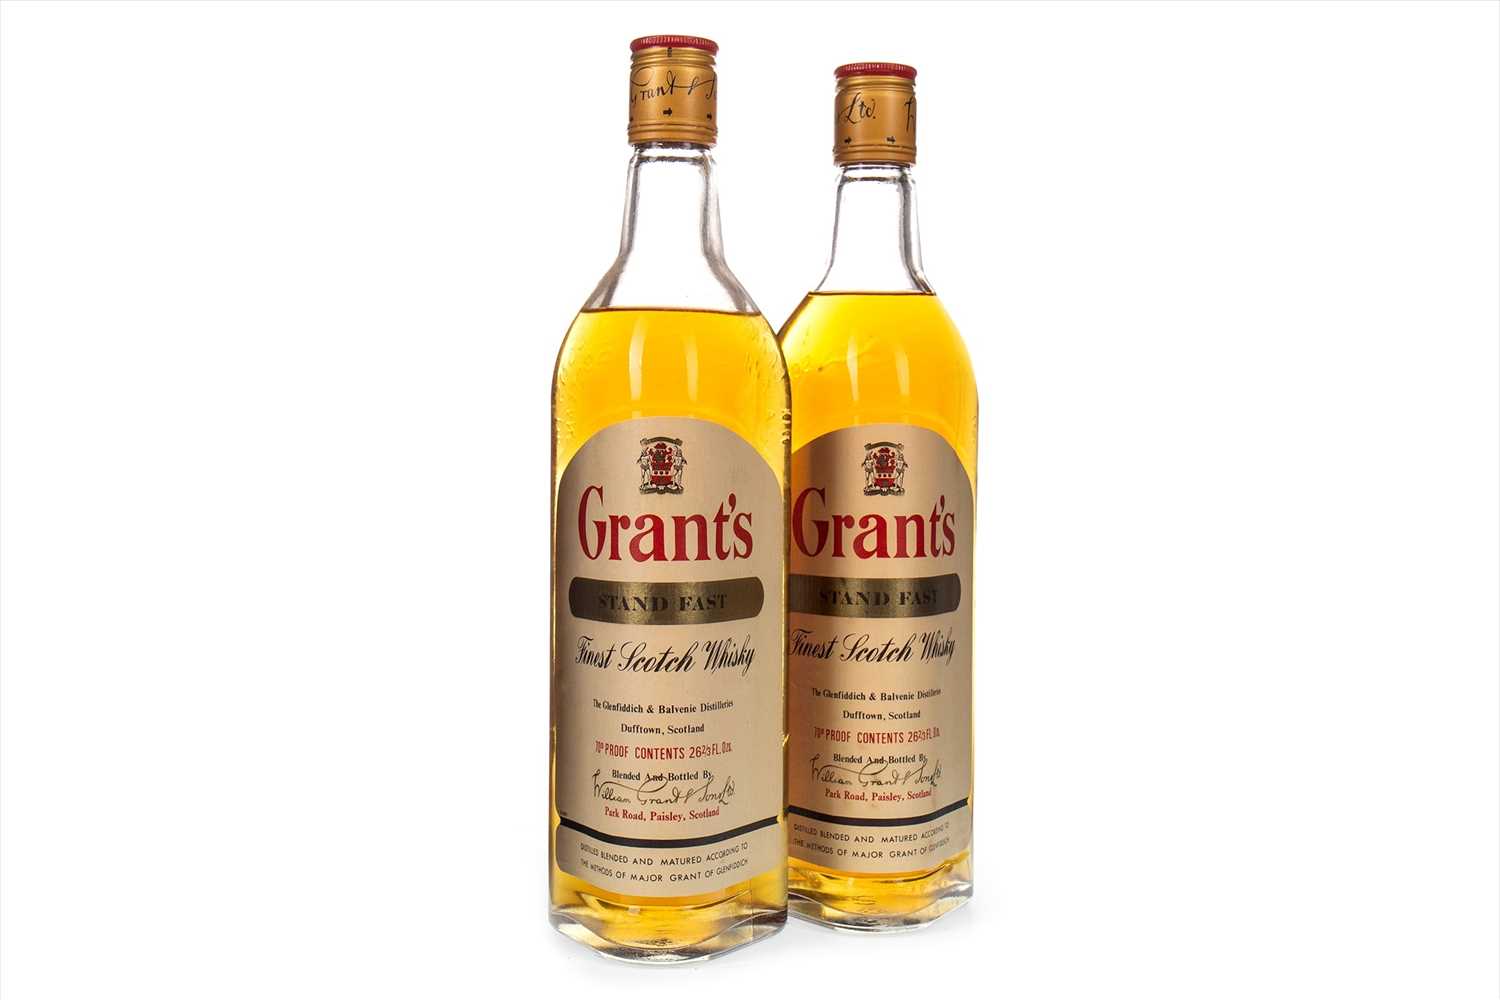 Lot 407 - TWO BOTTLES OF GRANT'S STAND FAST